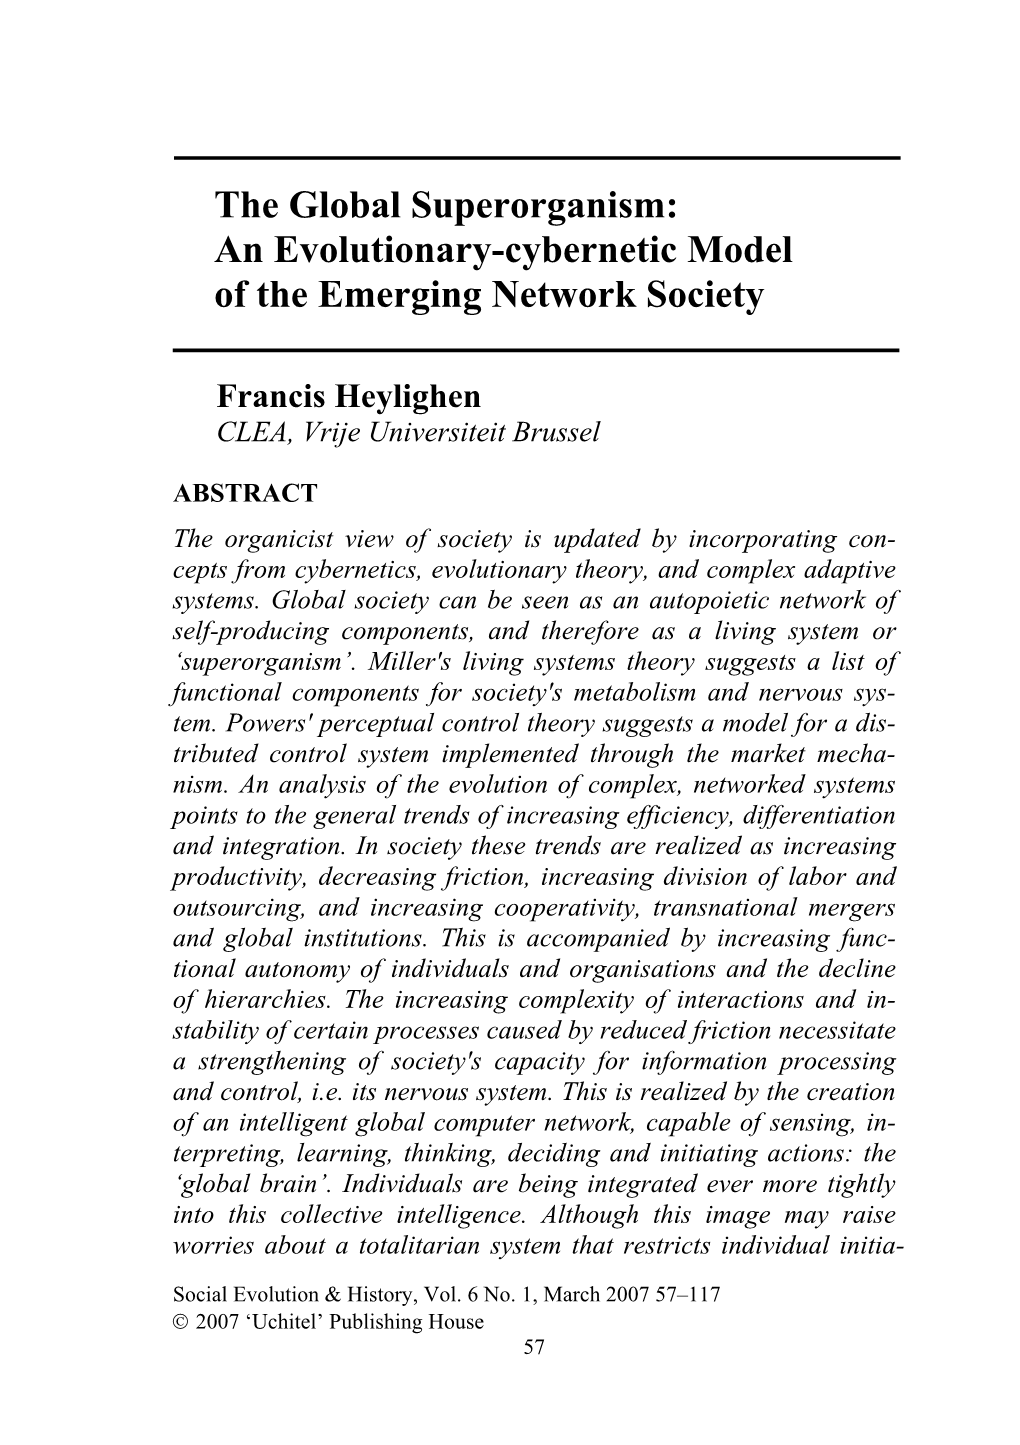 The Global Superorganism: an Evolutionary-Cybernetic Model of the Emerging Network Society